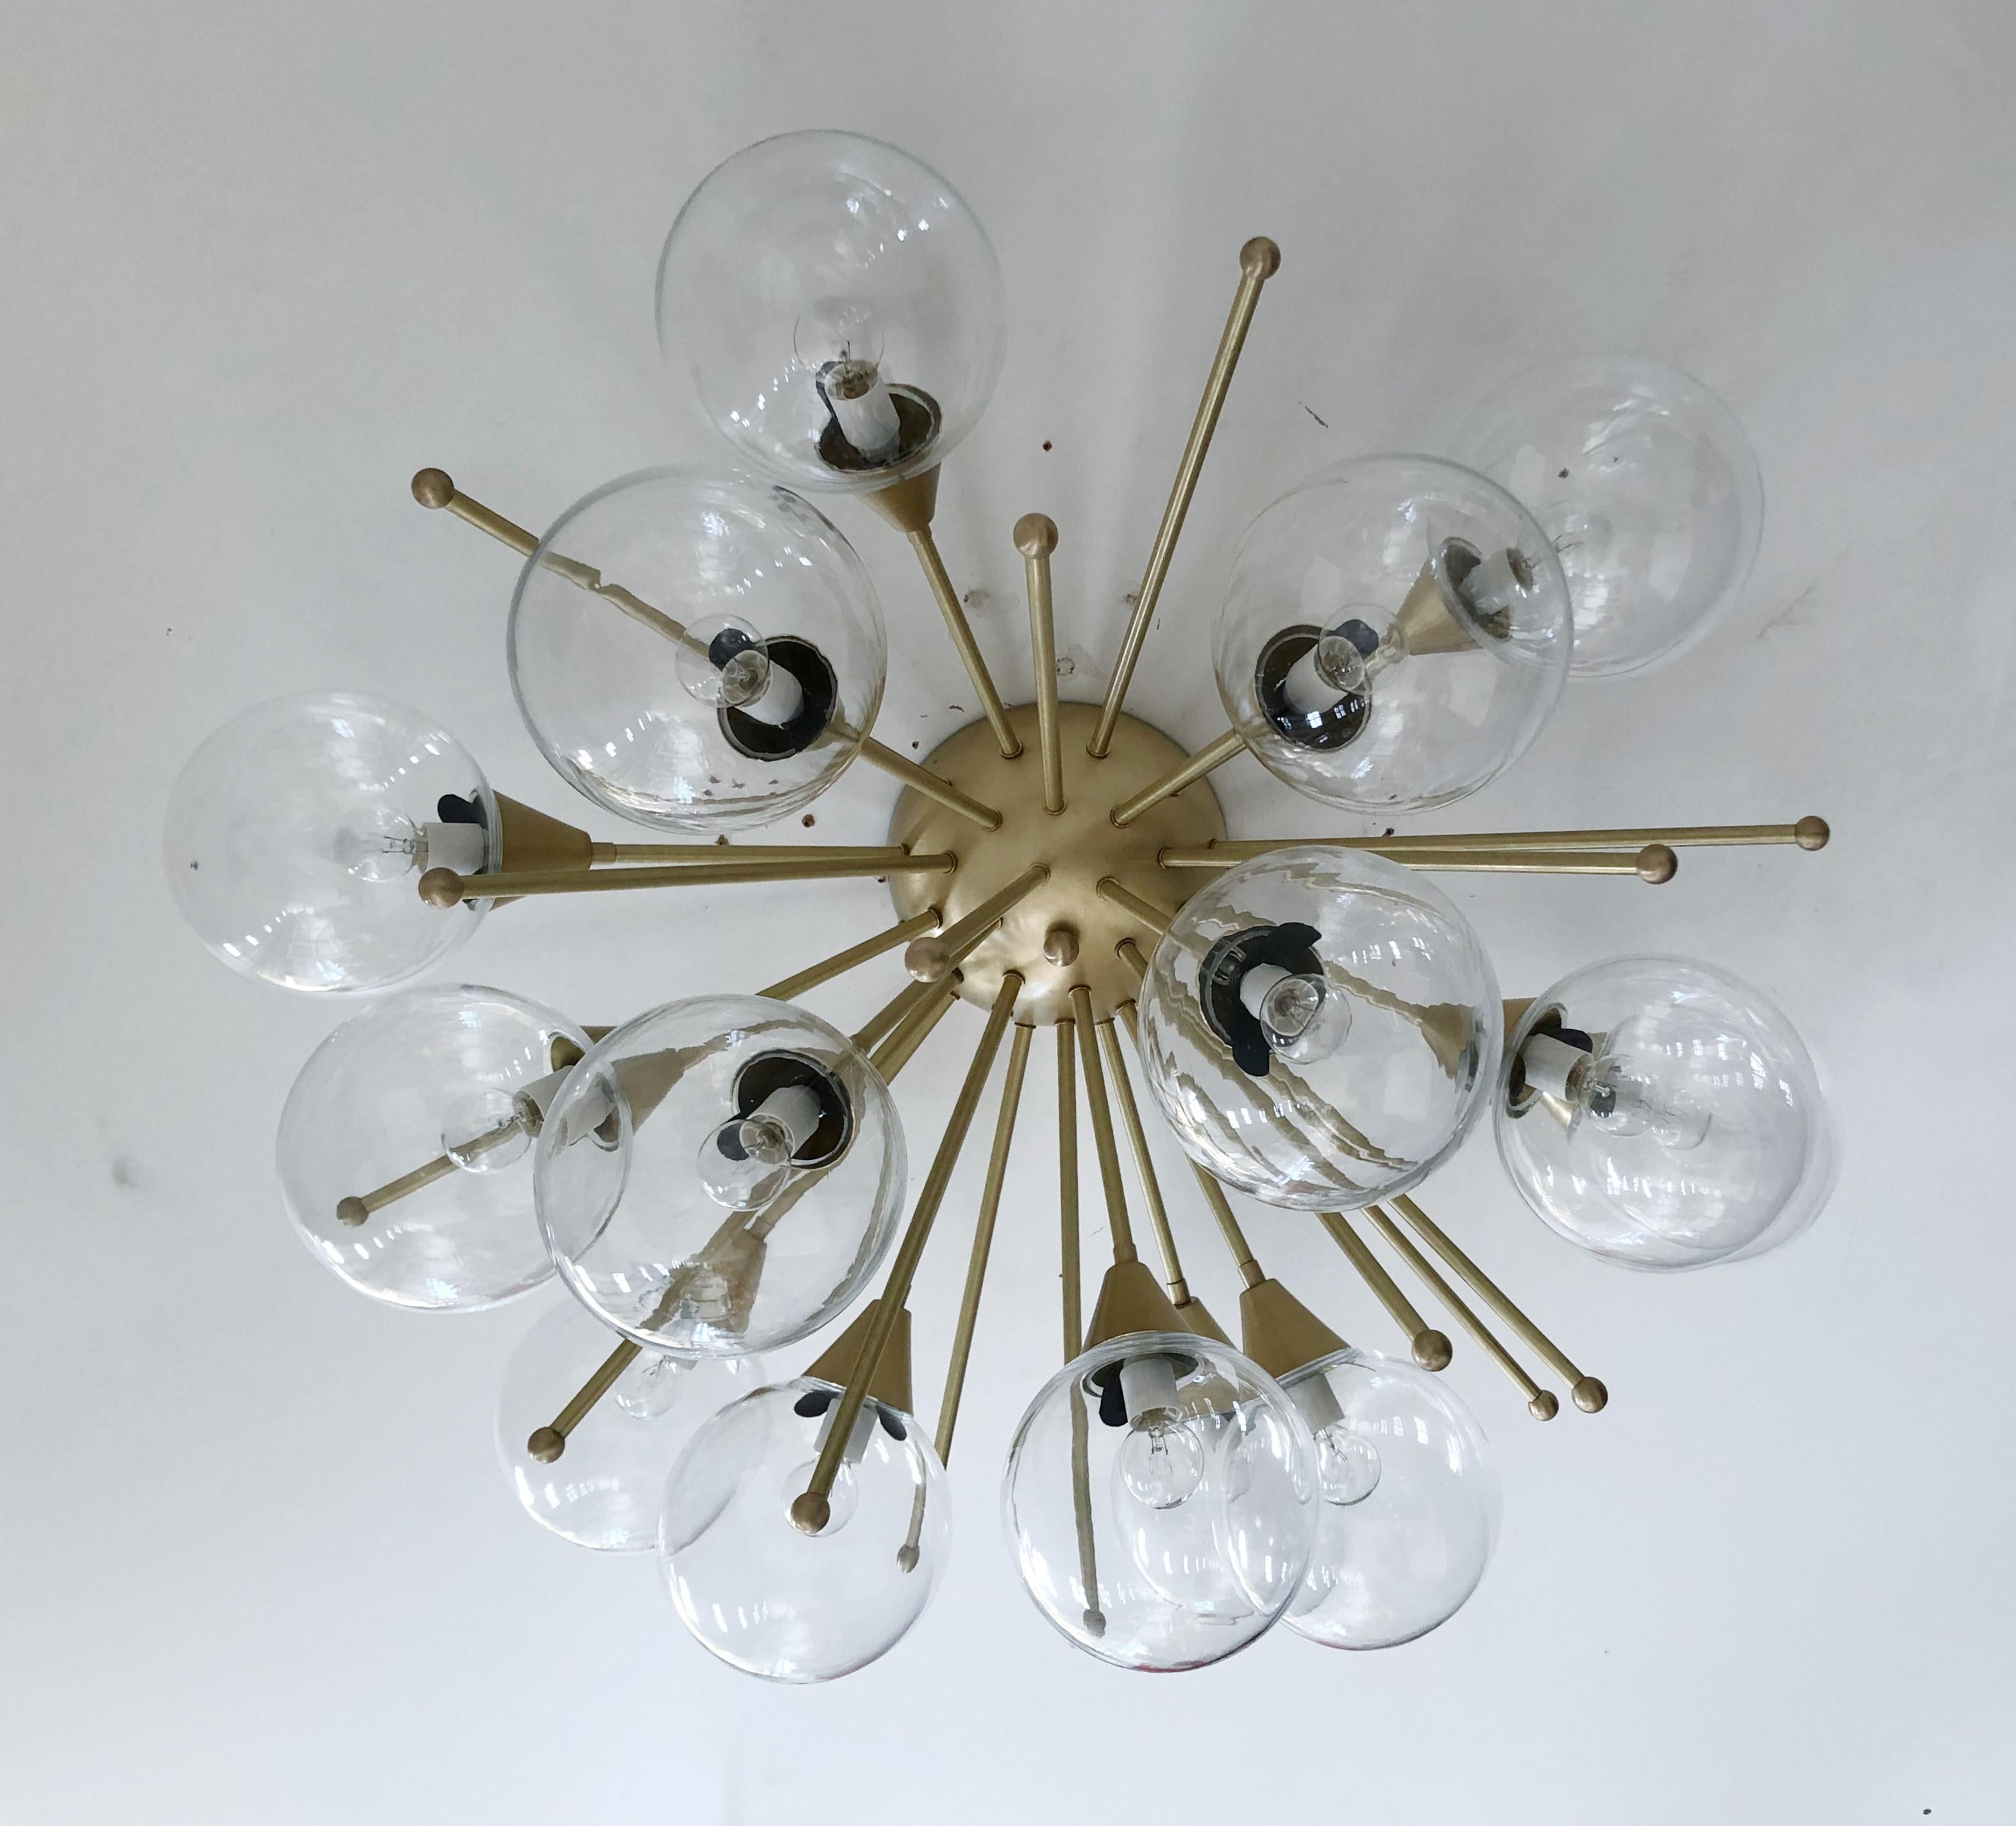 Italian sputnik flush mount with Murano glass globes mounted on solid brass frame
Designed by Fabio Bergomi / Made in Italy
15 lights / E12 or E14 type / max 40W each
Diameter: 35.5 inches / Height: 18 inches
Order Only / This item ships from